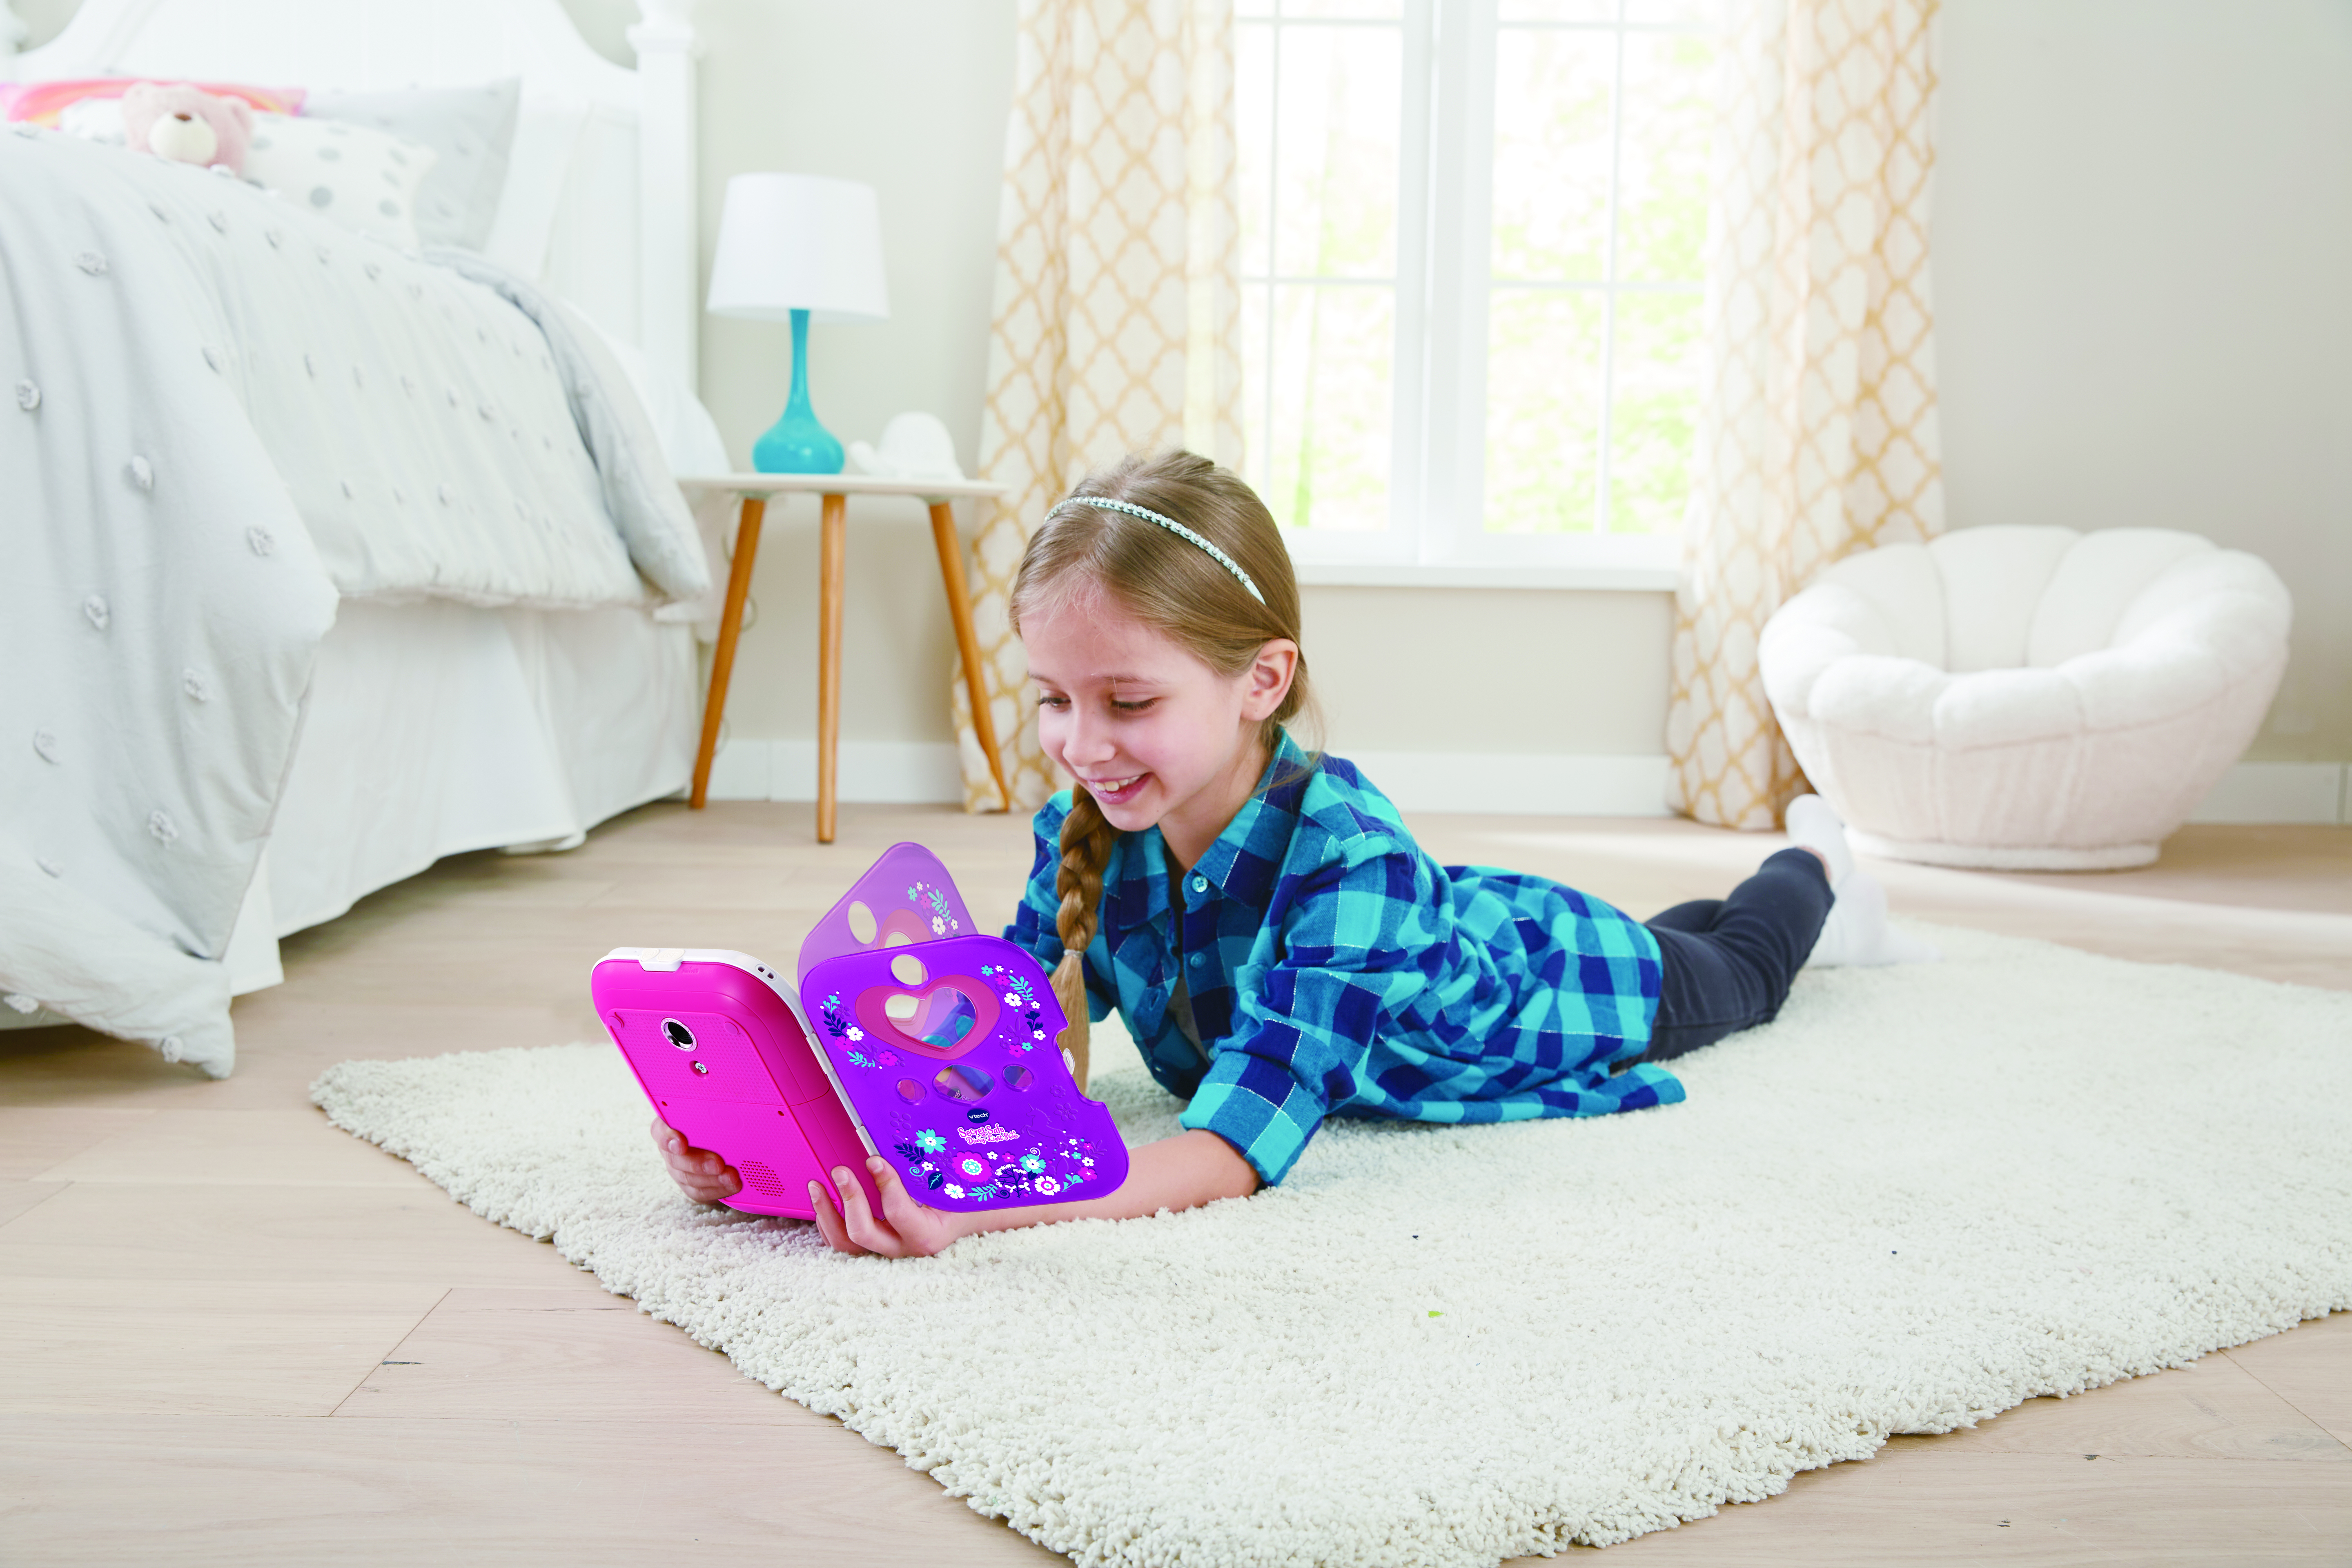 Take care of your very own virtual pet unicorn and play great learning activities that cover spelling, typing, maths, logic and more!